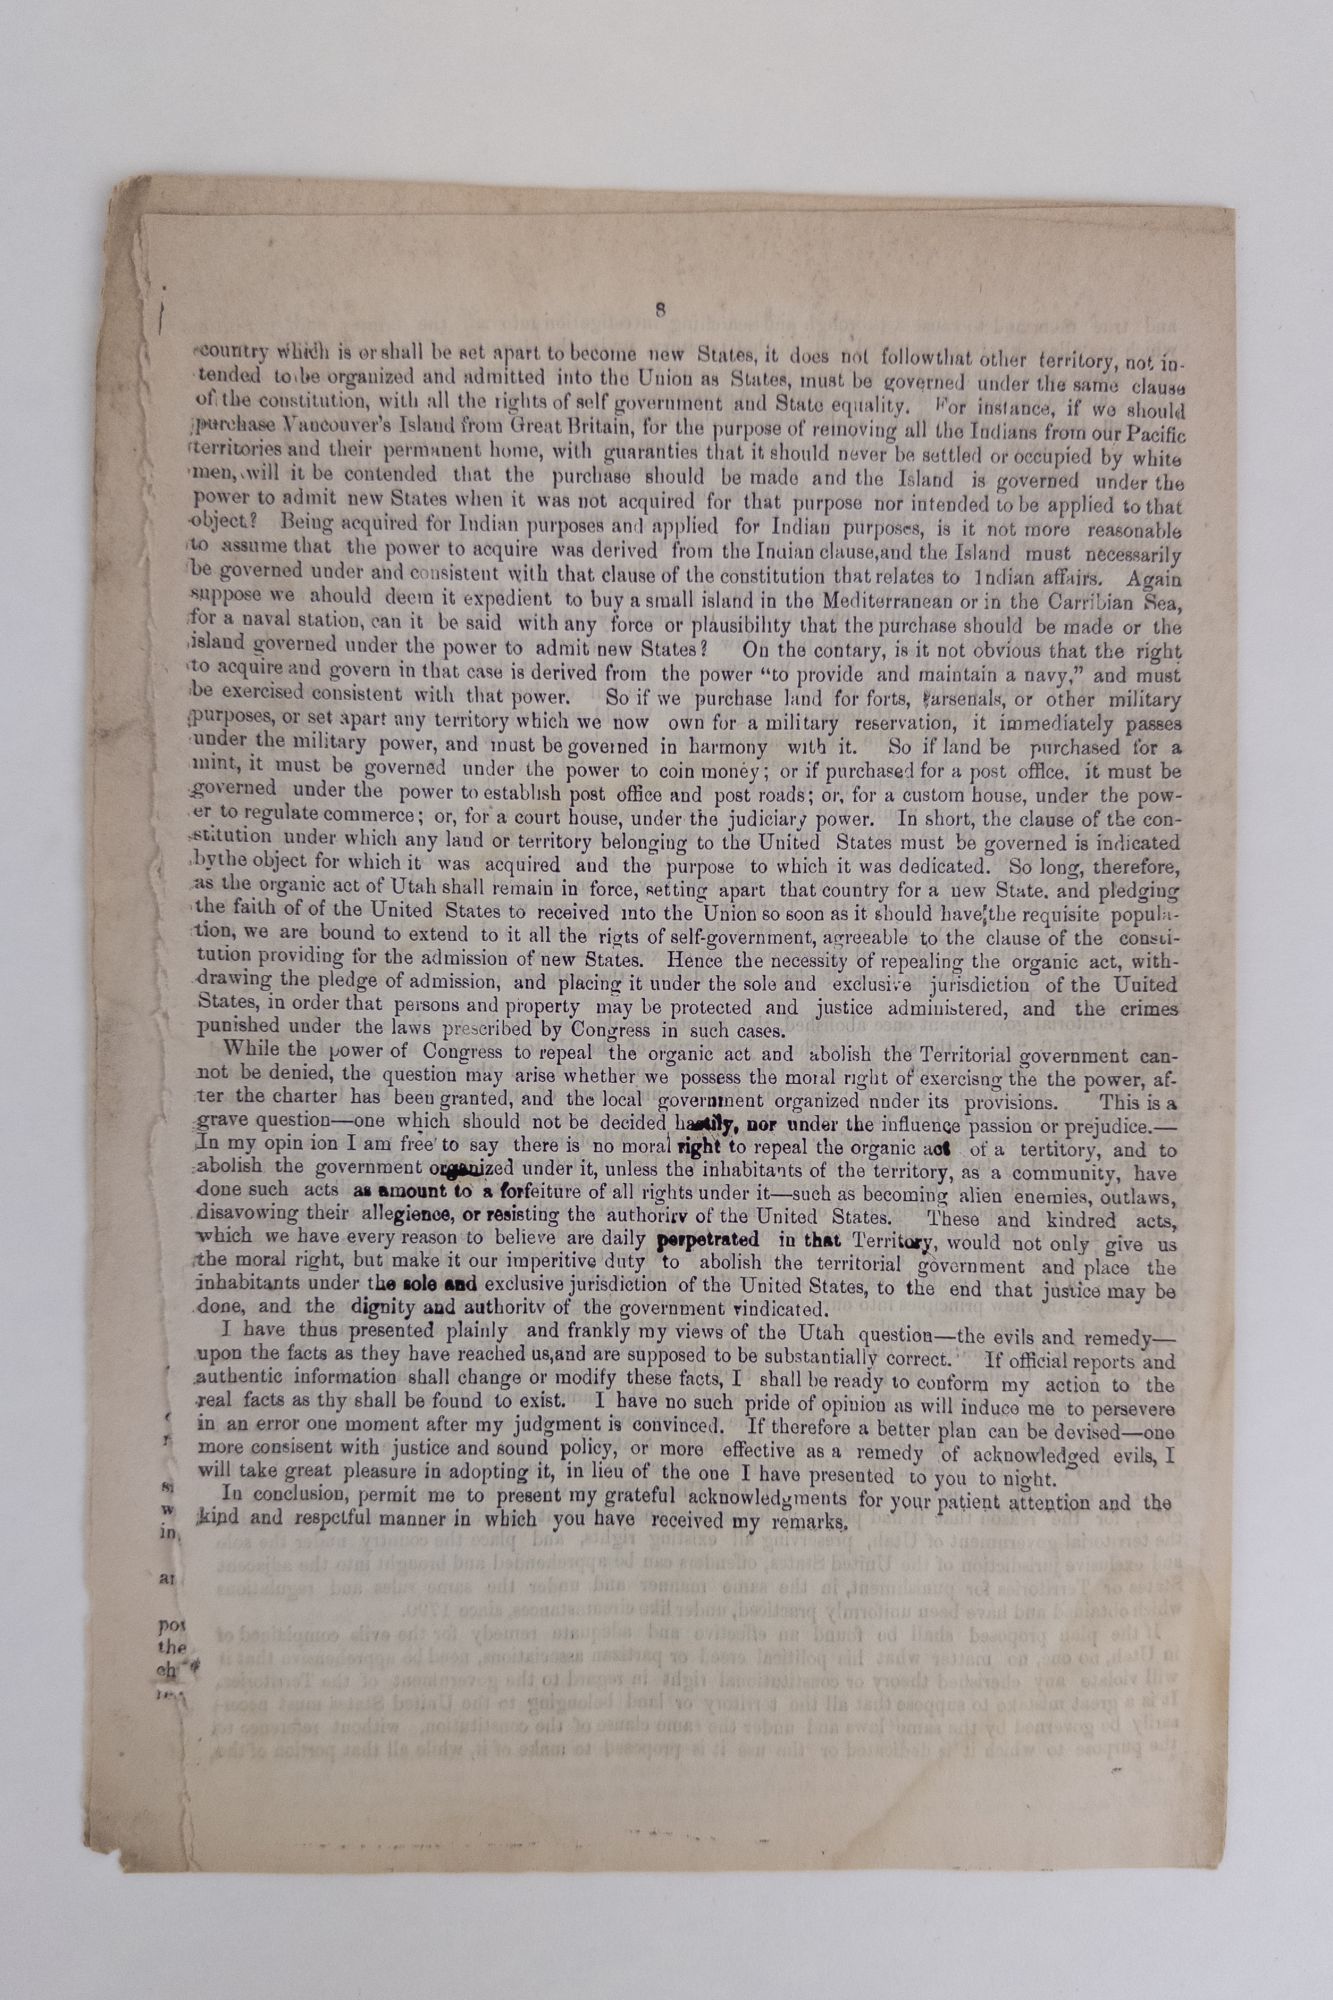 Product Image for KANSAS, UTAH, AND THE DRED SCOTT DECISION. REMARKS OF HON. STEPHEN A. DOUGLASS, DELIVERED IN THE STATE HOUSE AT SPRINGFIELD, ILLINOIS, ON THE 12TH OF JUNE, 1857